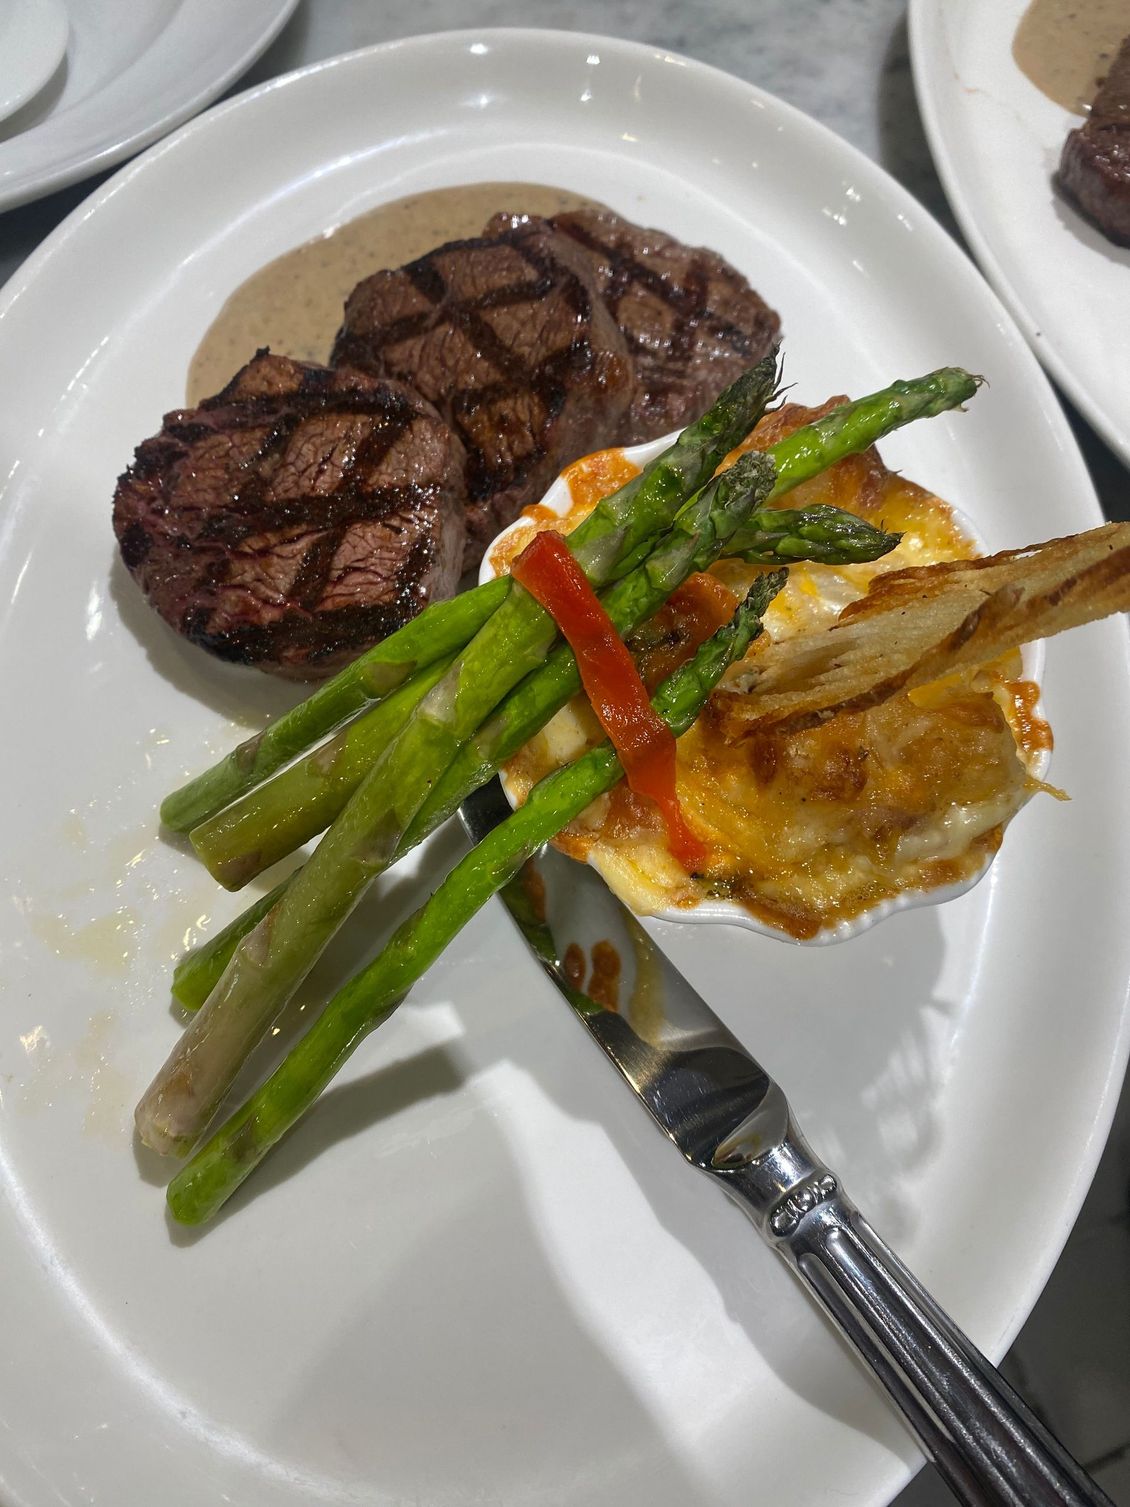 A plate of food with asparagus and steak on it